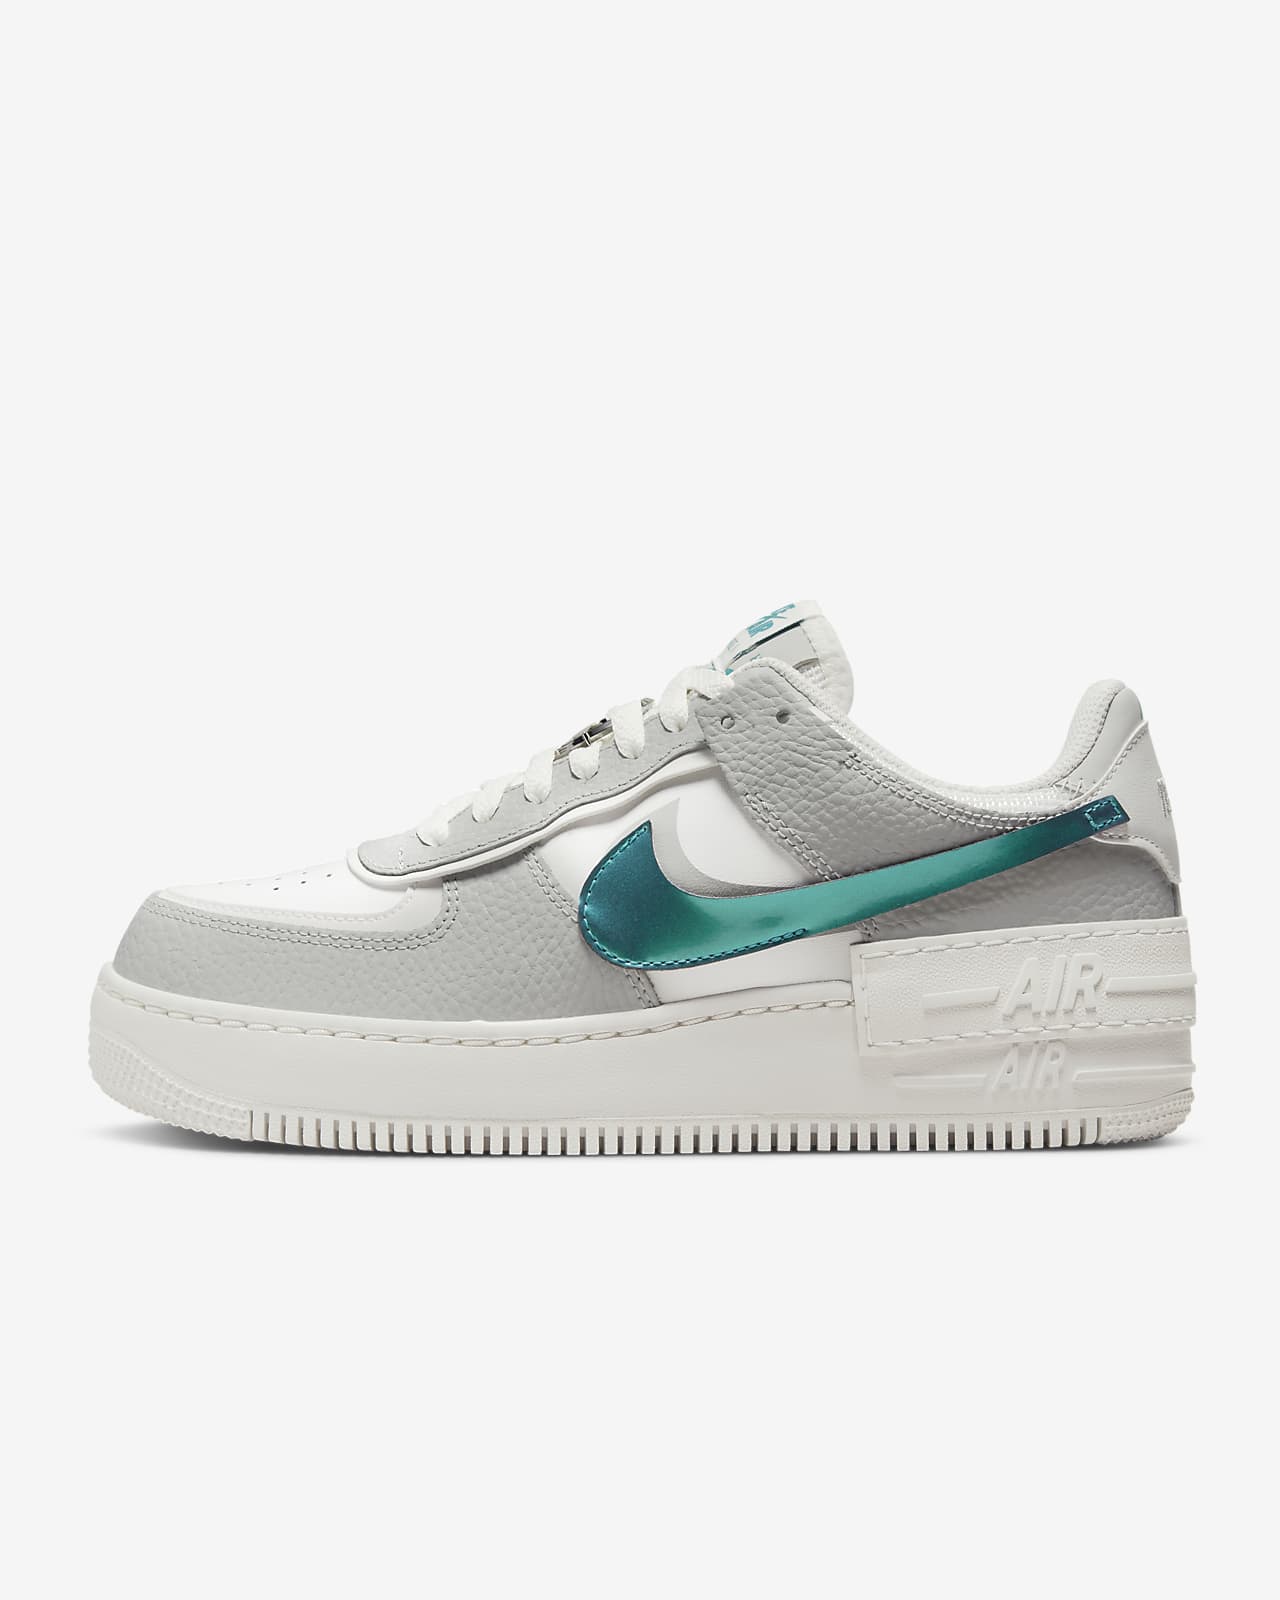 chaussure pour femme nike air force 1 shadow,Nike Air Force 1 Shadow Women's Shoes. Nike.com